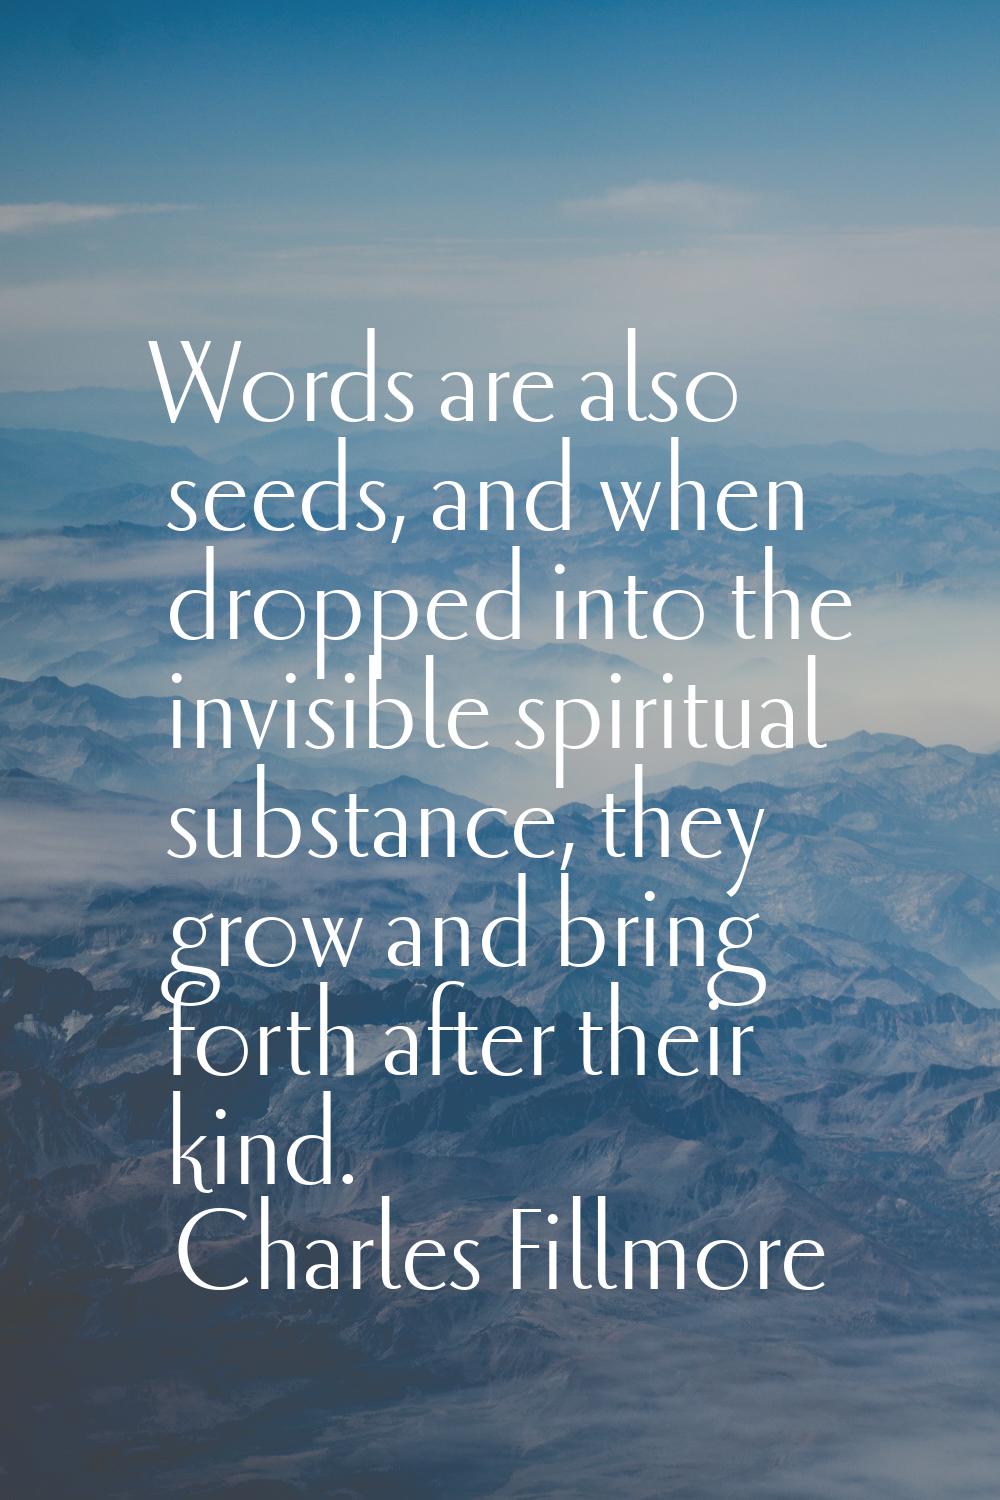 Words are also seeds, and when dropped into the invisible spiritual substance, they grow and bring 